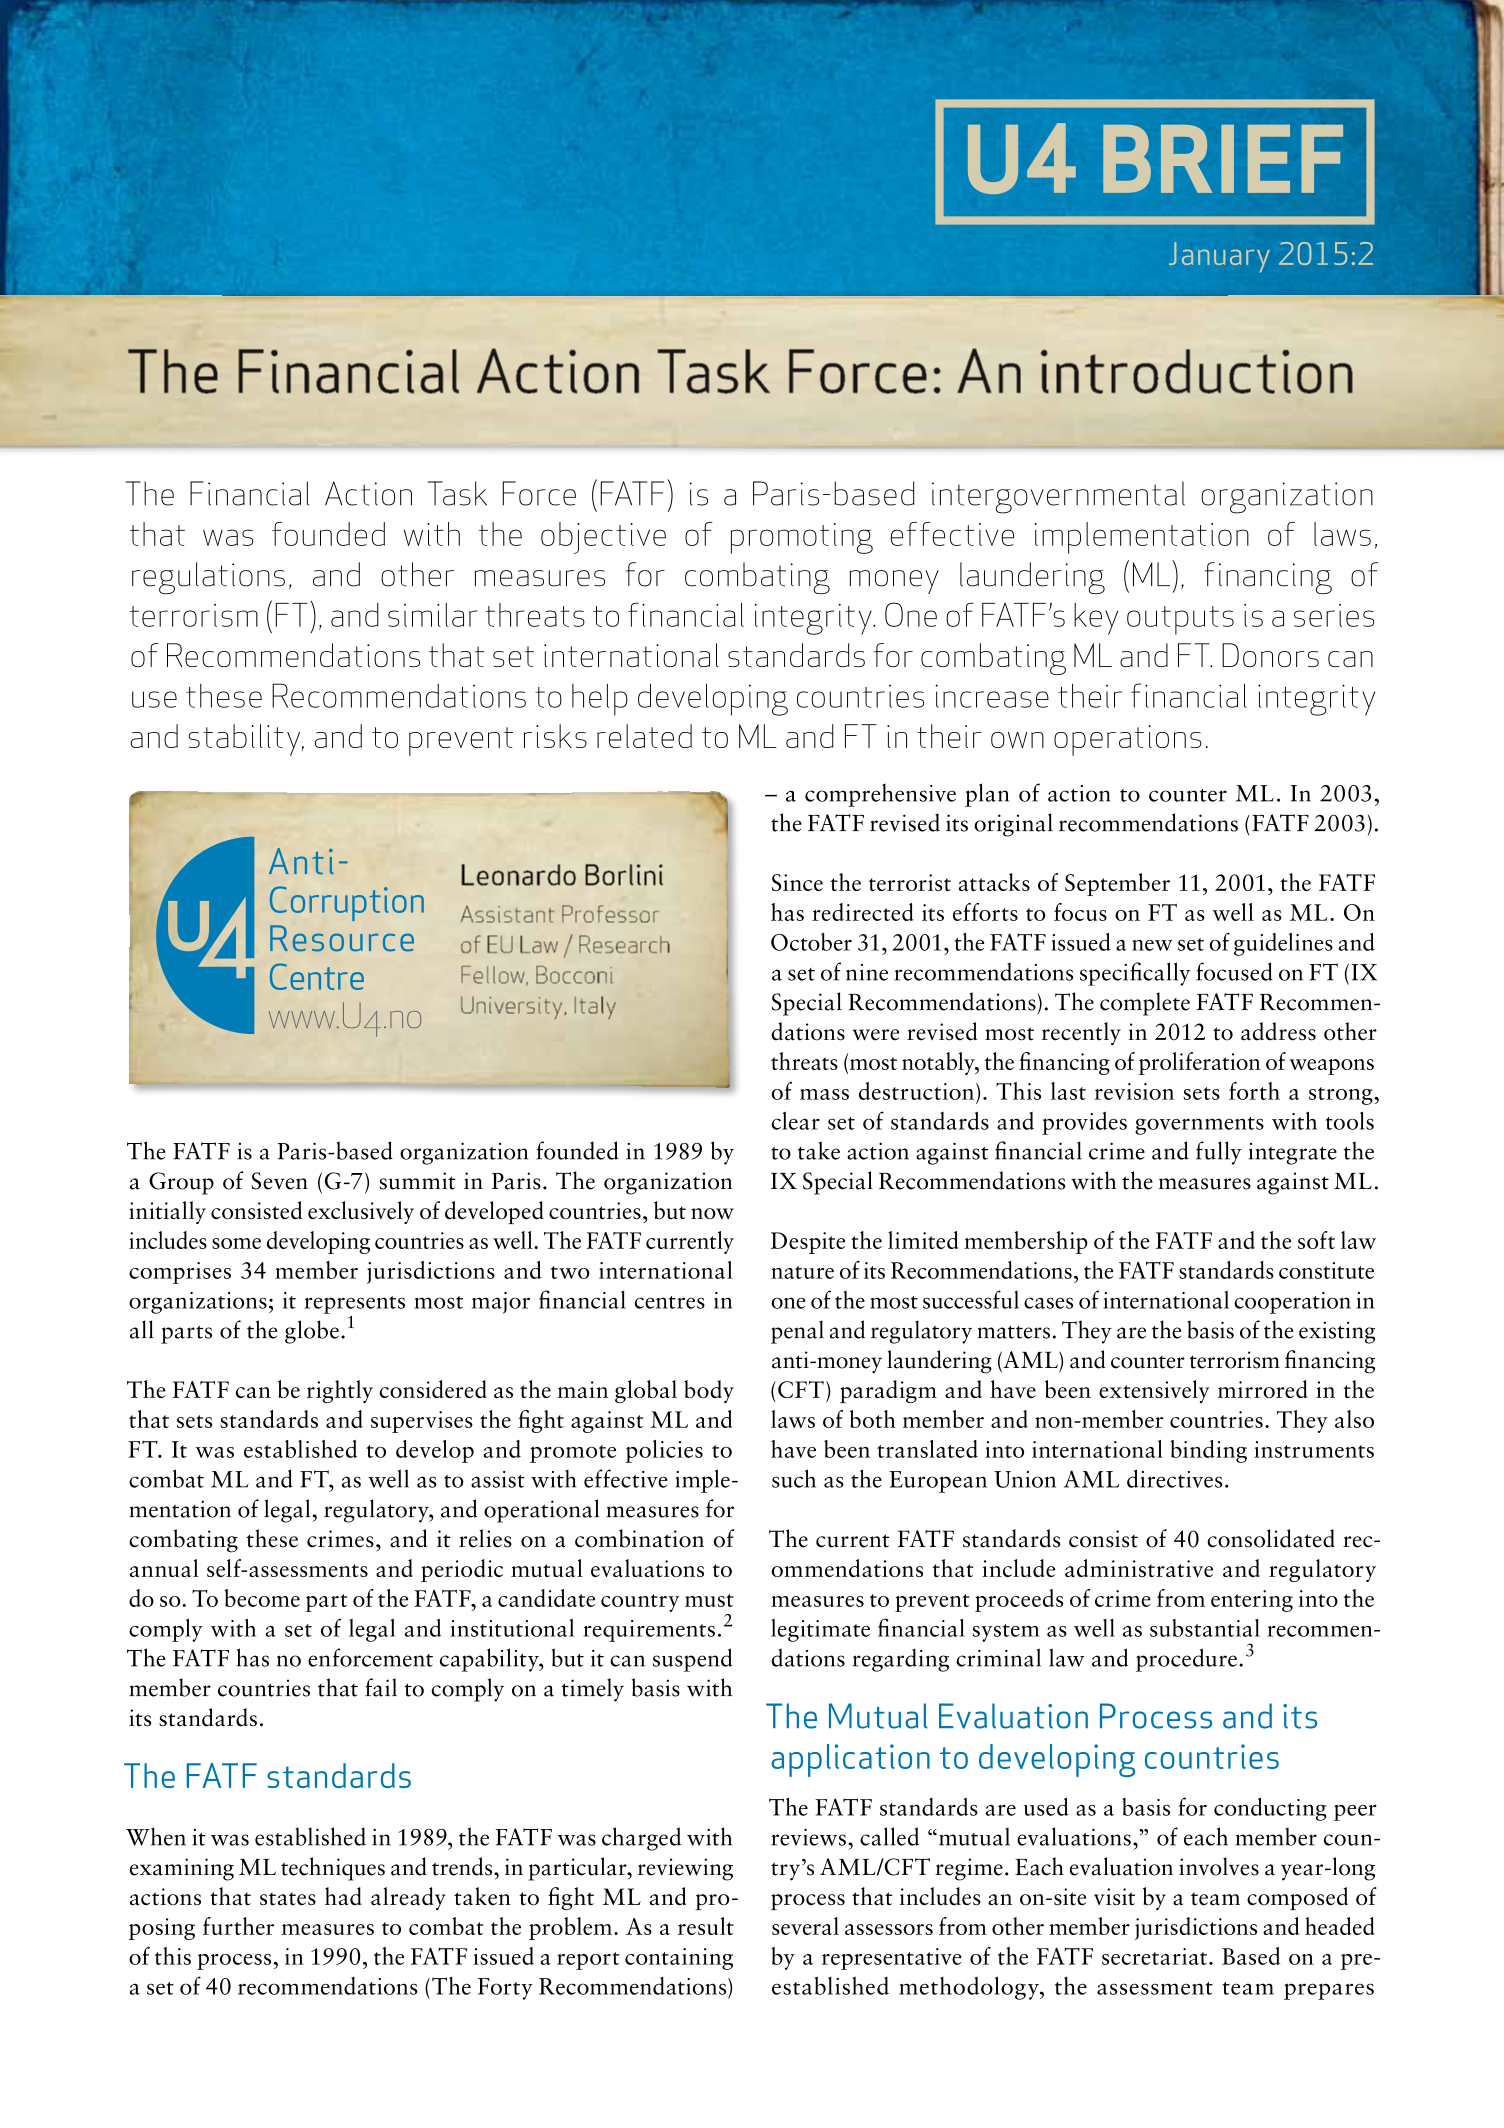 The Financial Action Task Force: An introduction